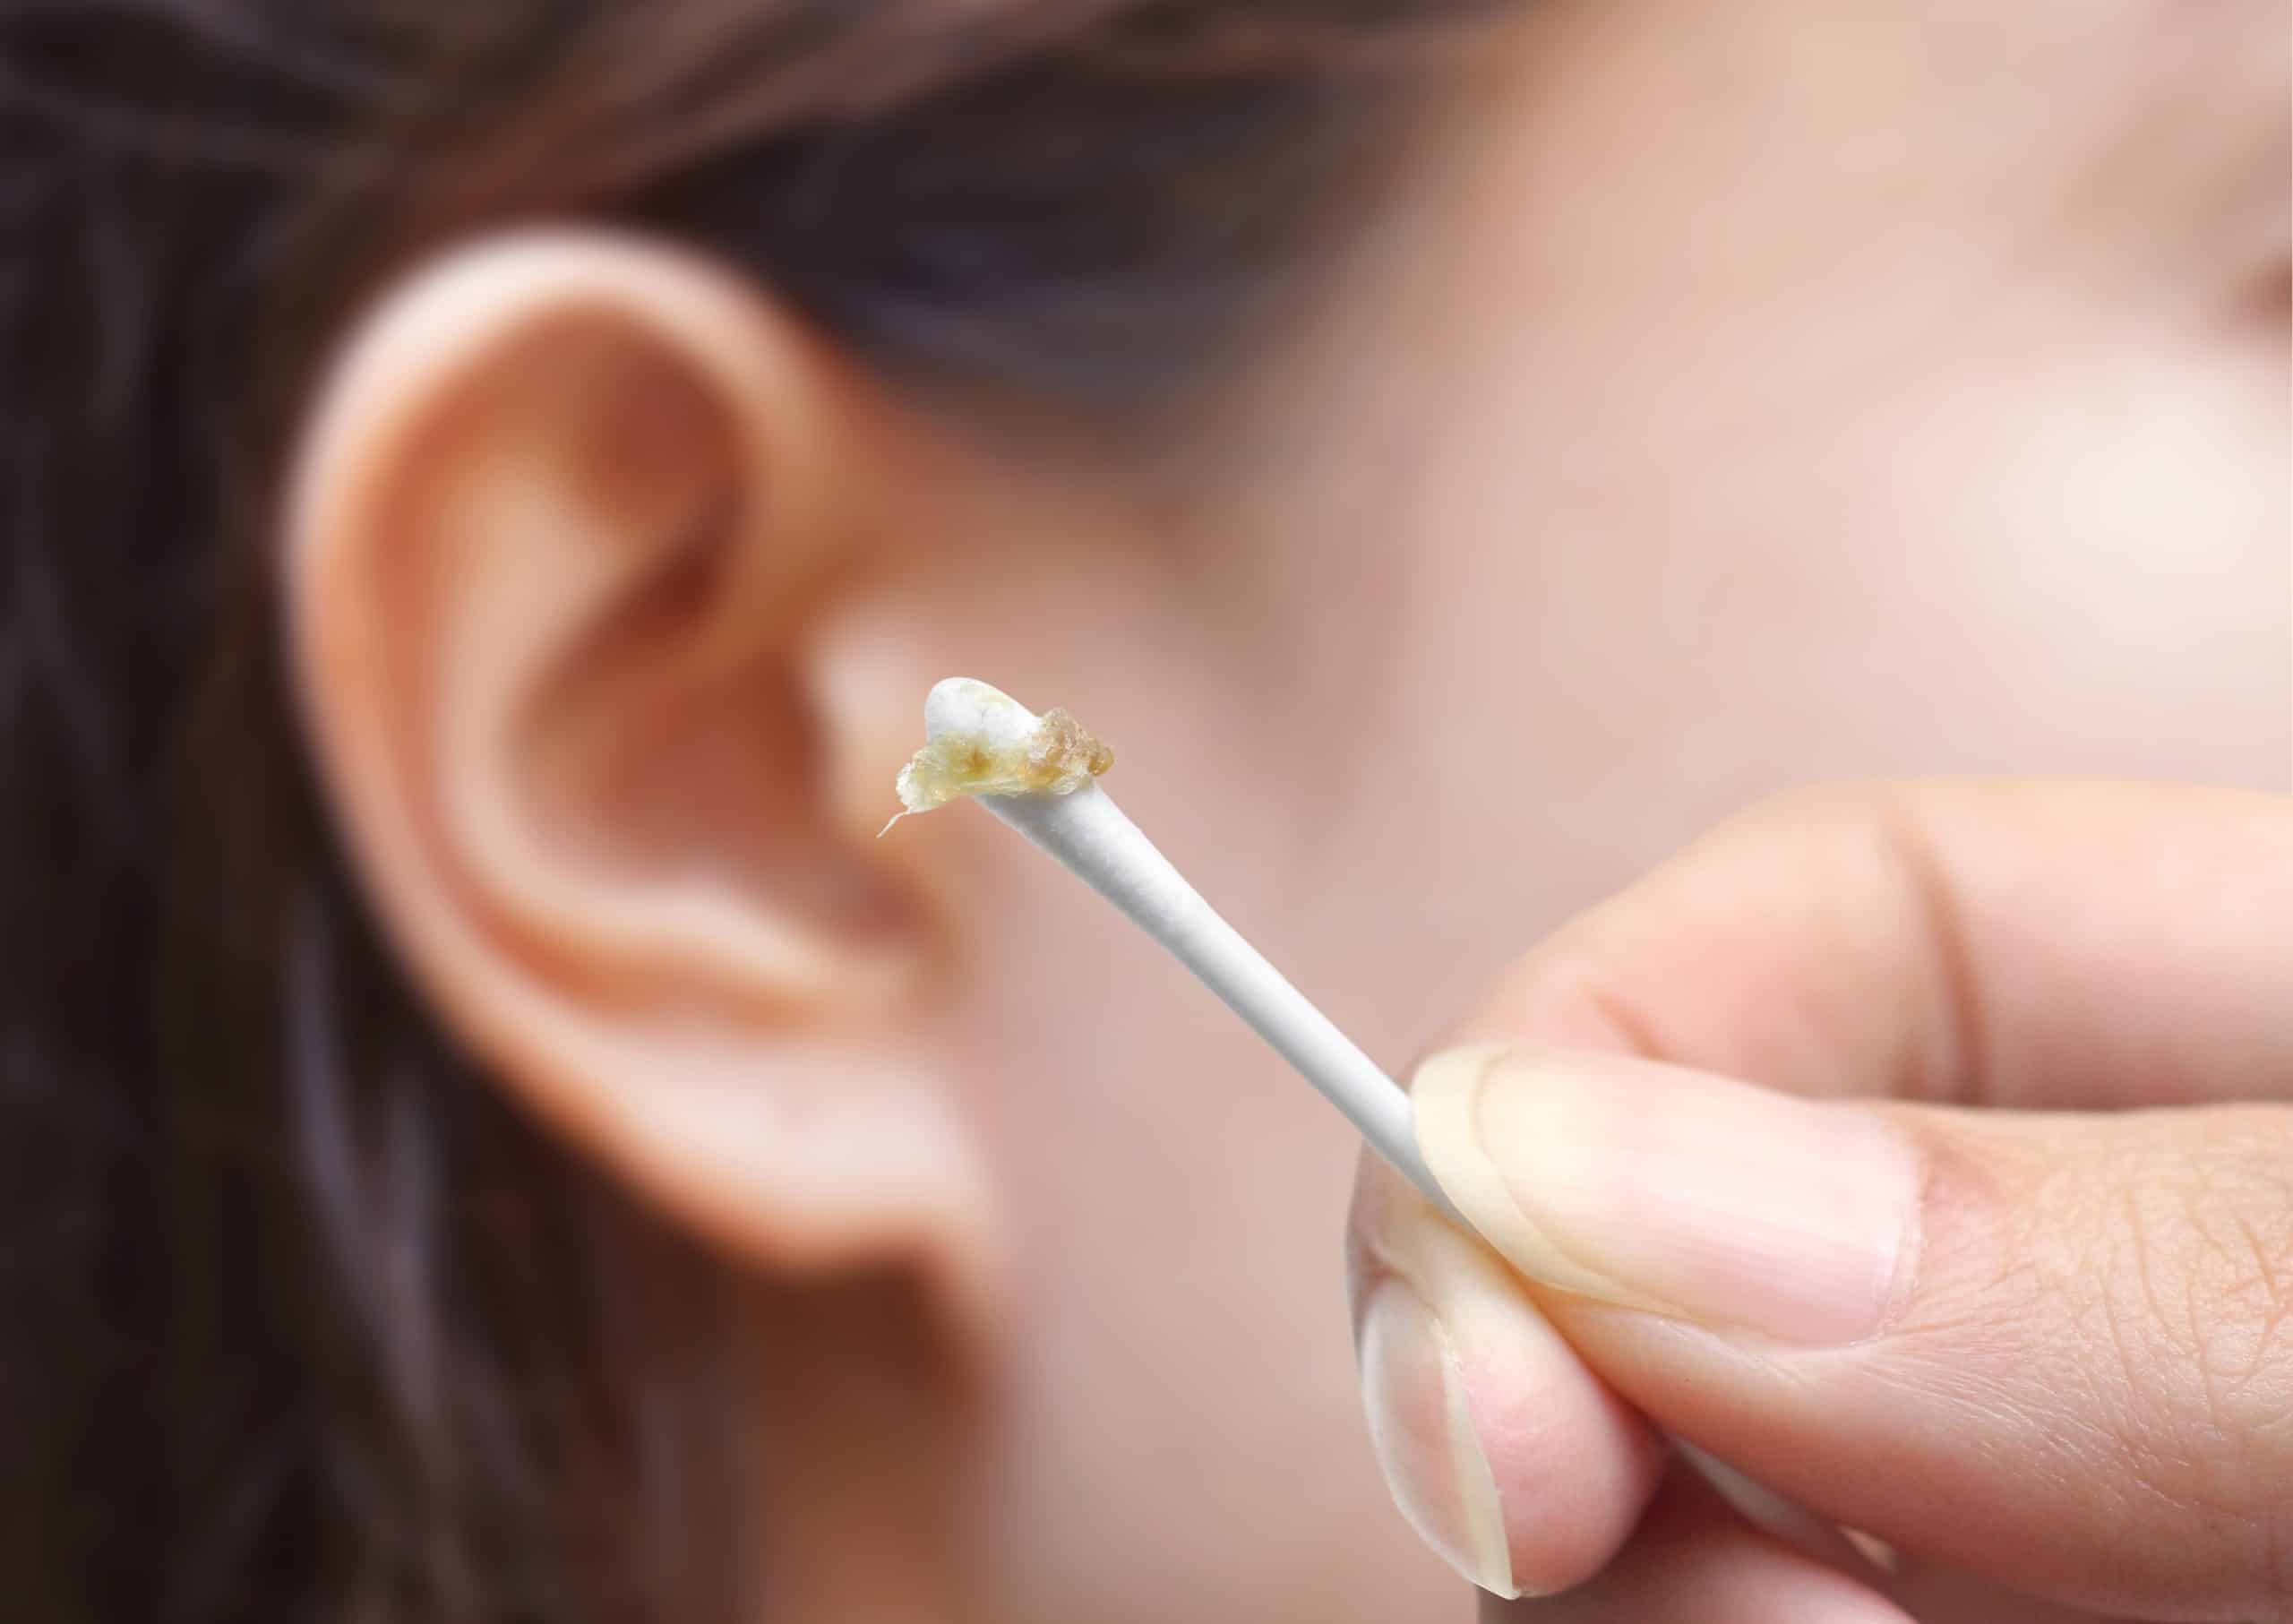 Ear wax removal: how to safely remove build-up at home - Which?